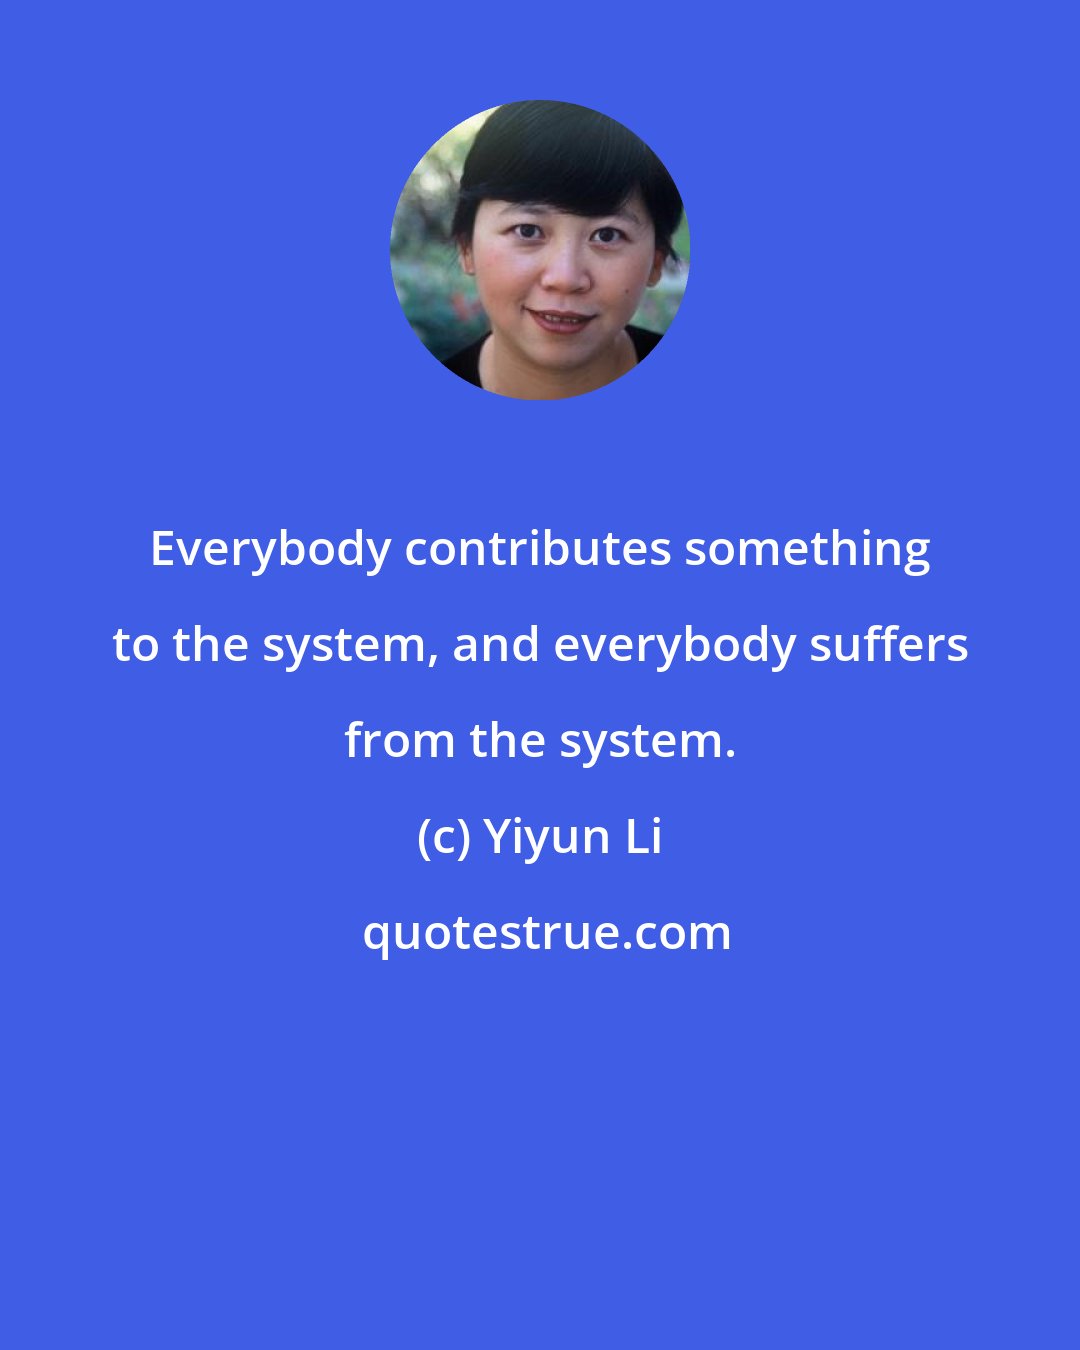 Yiyun Li: Everybody contributes something to the system, and everybody suffers from the system.